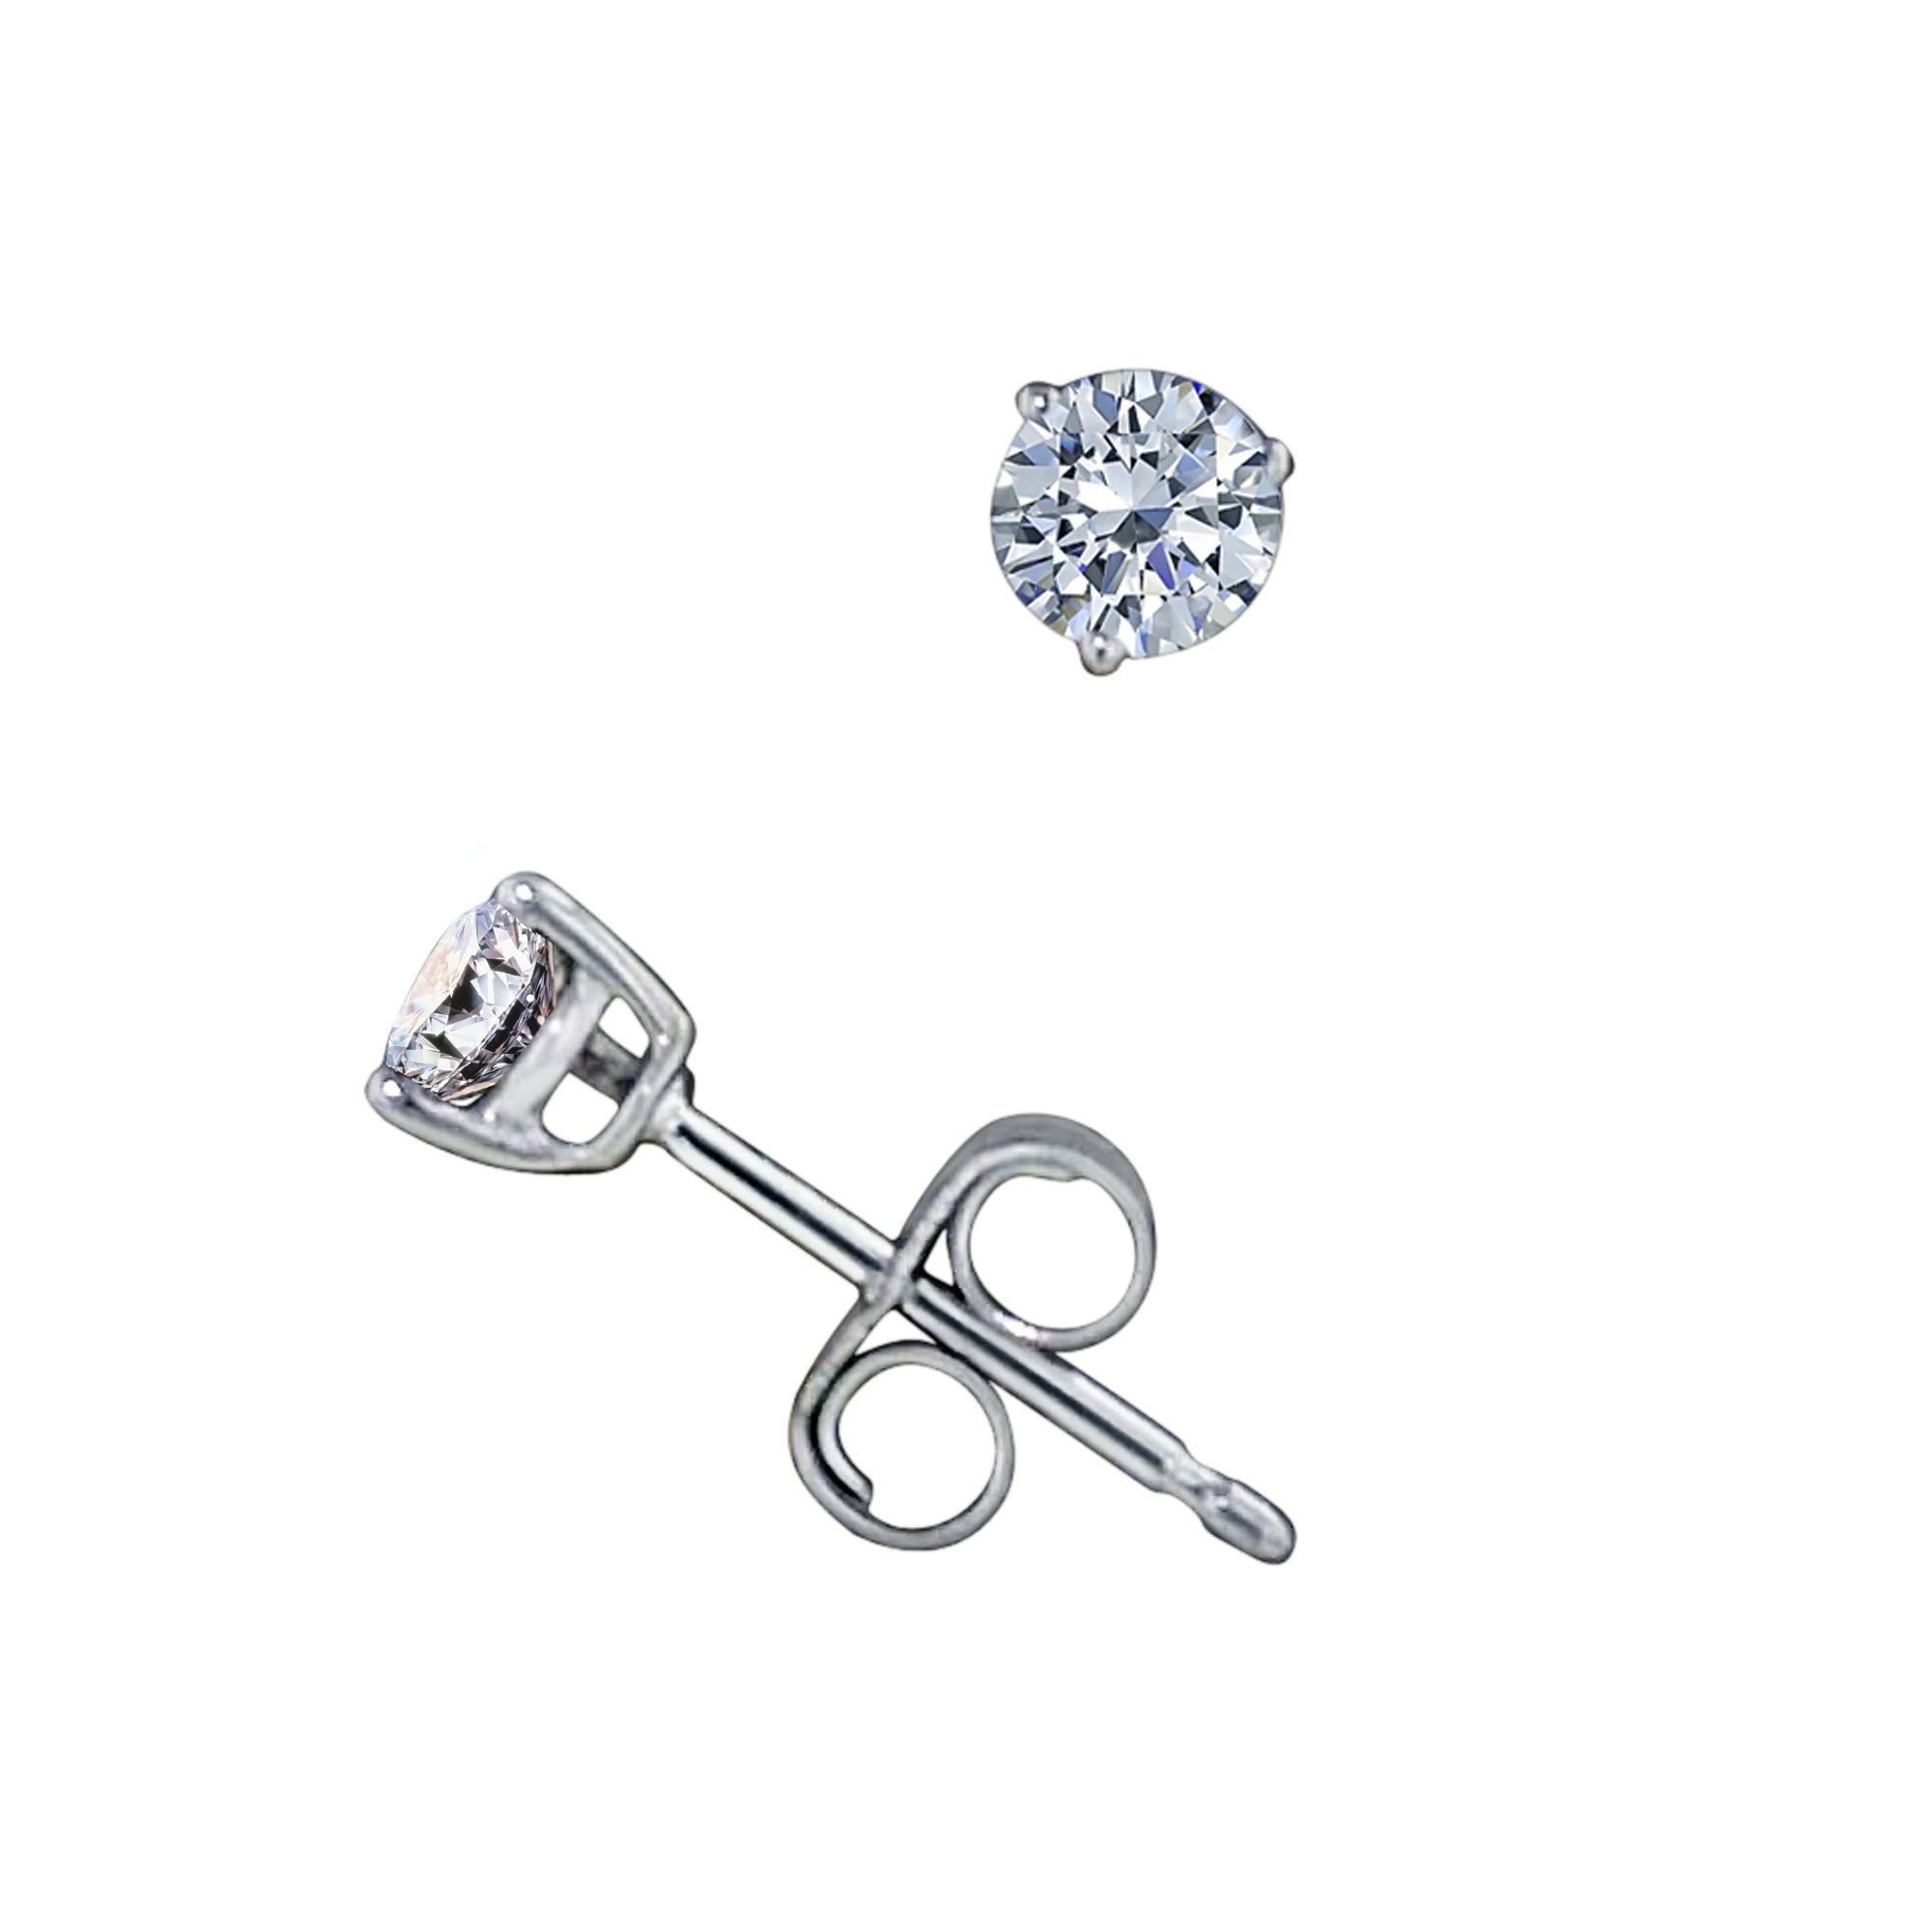 Northern Star Diamond Stud Earrings in 14kt White Gold (1/3ct tw)